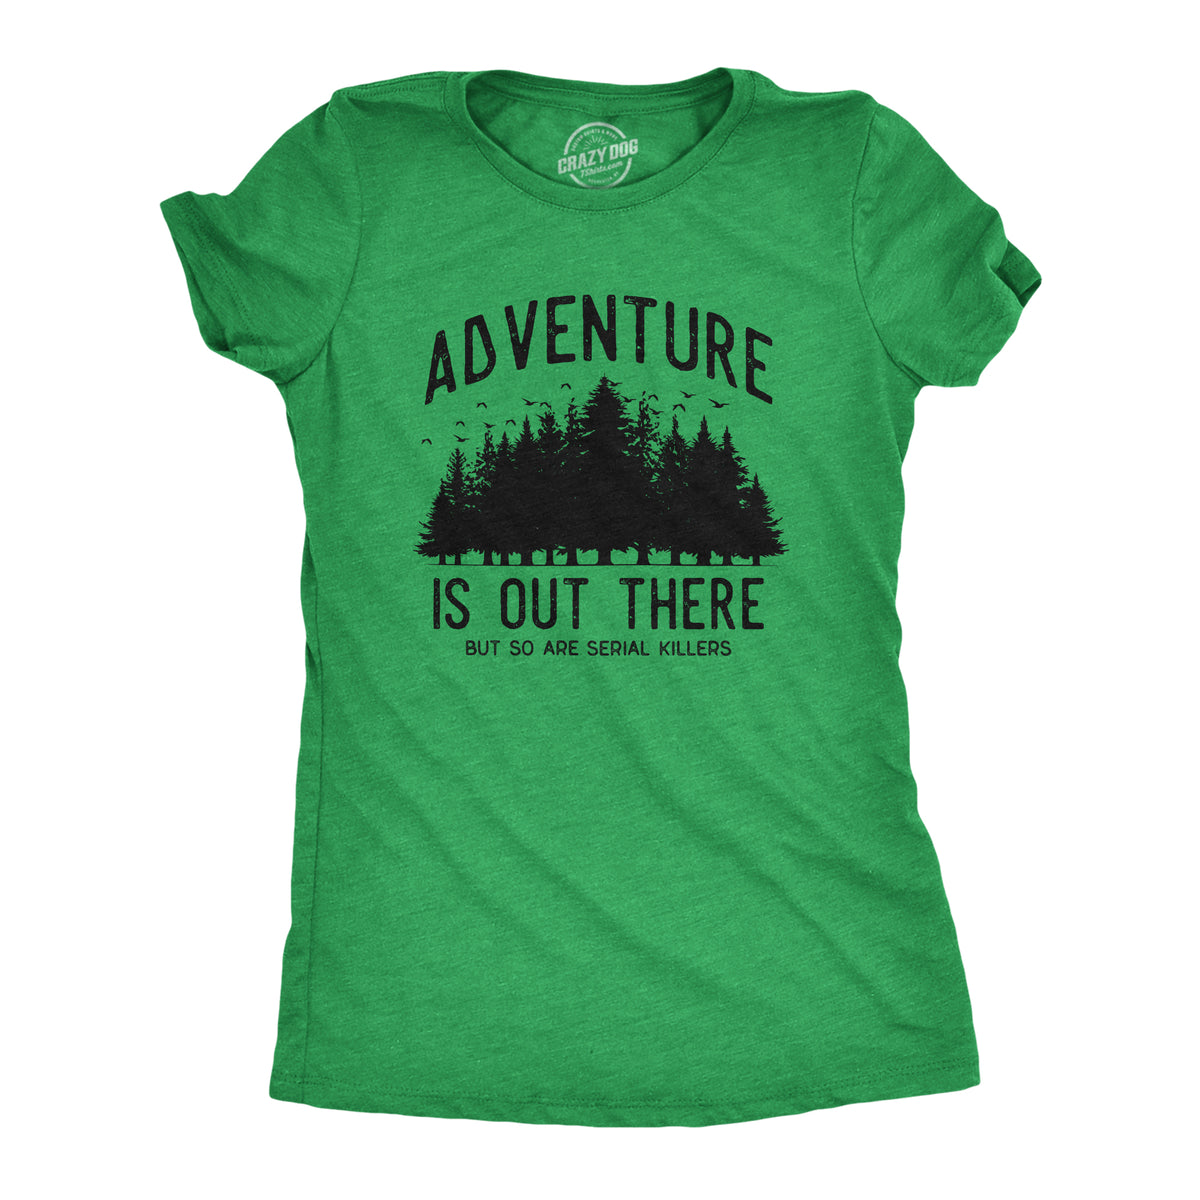 Funny Heather Green - ADVENTURE Adventure Is Out There But So Are Serial Killers Womens T Shirt Nerdy Sarcastic Tee